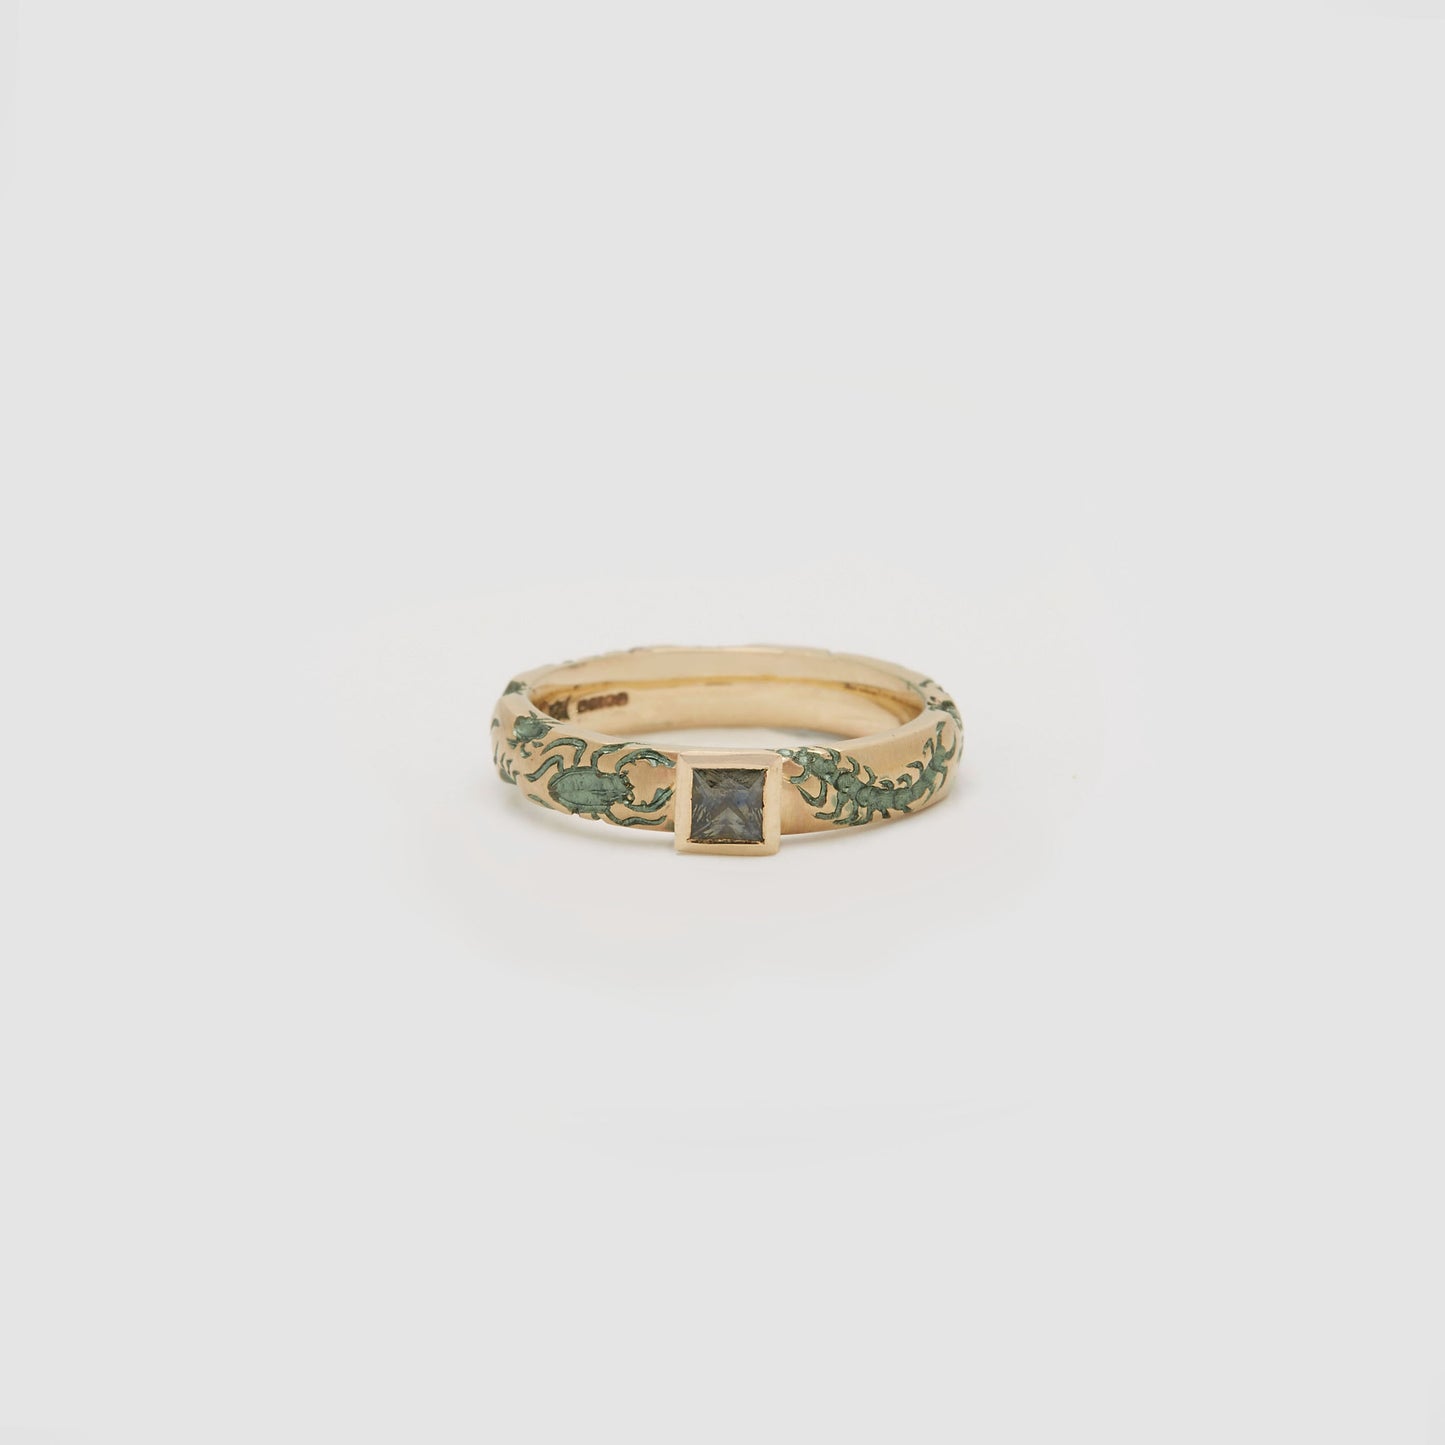 Castro Smith Jewelry Gold Undergrowth Ring with a Square Cut Sapphire and Slate Green Engravings in Profile View.